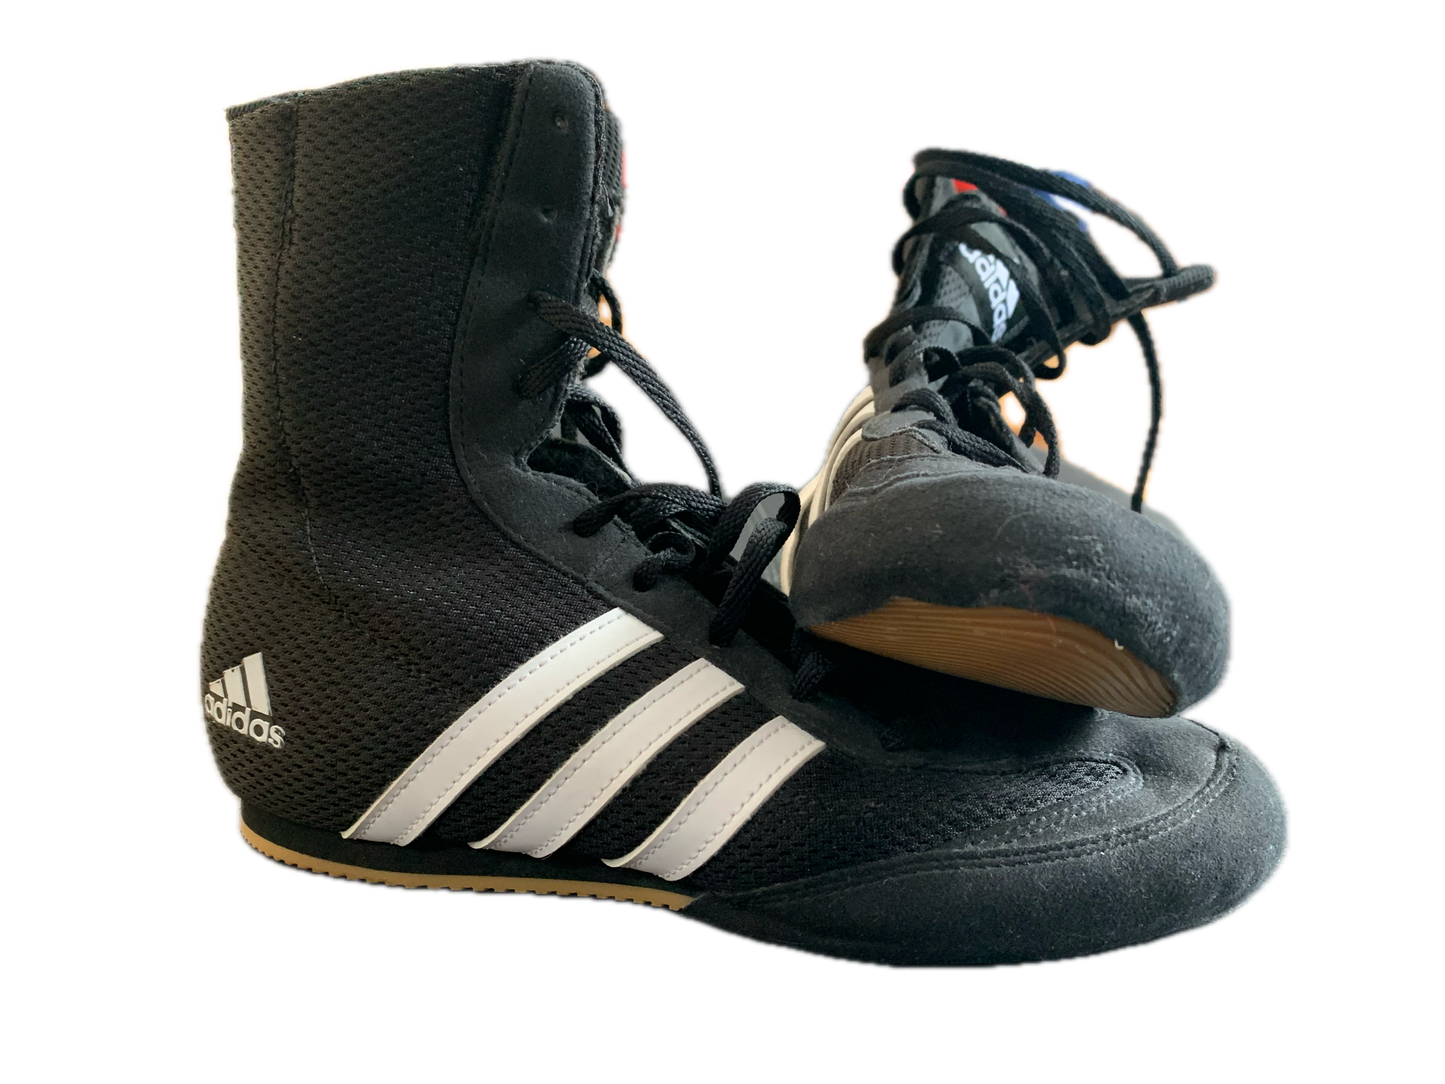 Adidas Box hog boxing shoes - Defective-Boxing shoes-Adidas®-4-Canada Fighting